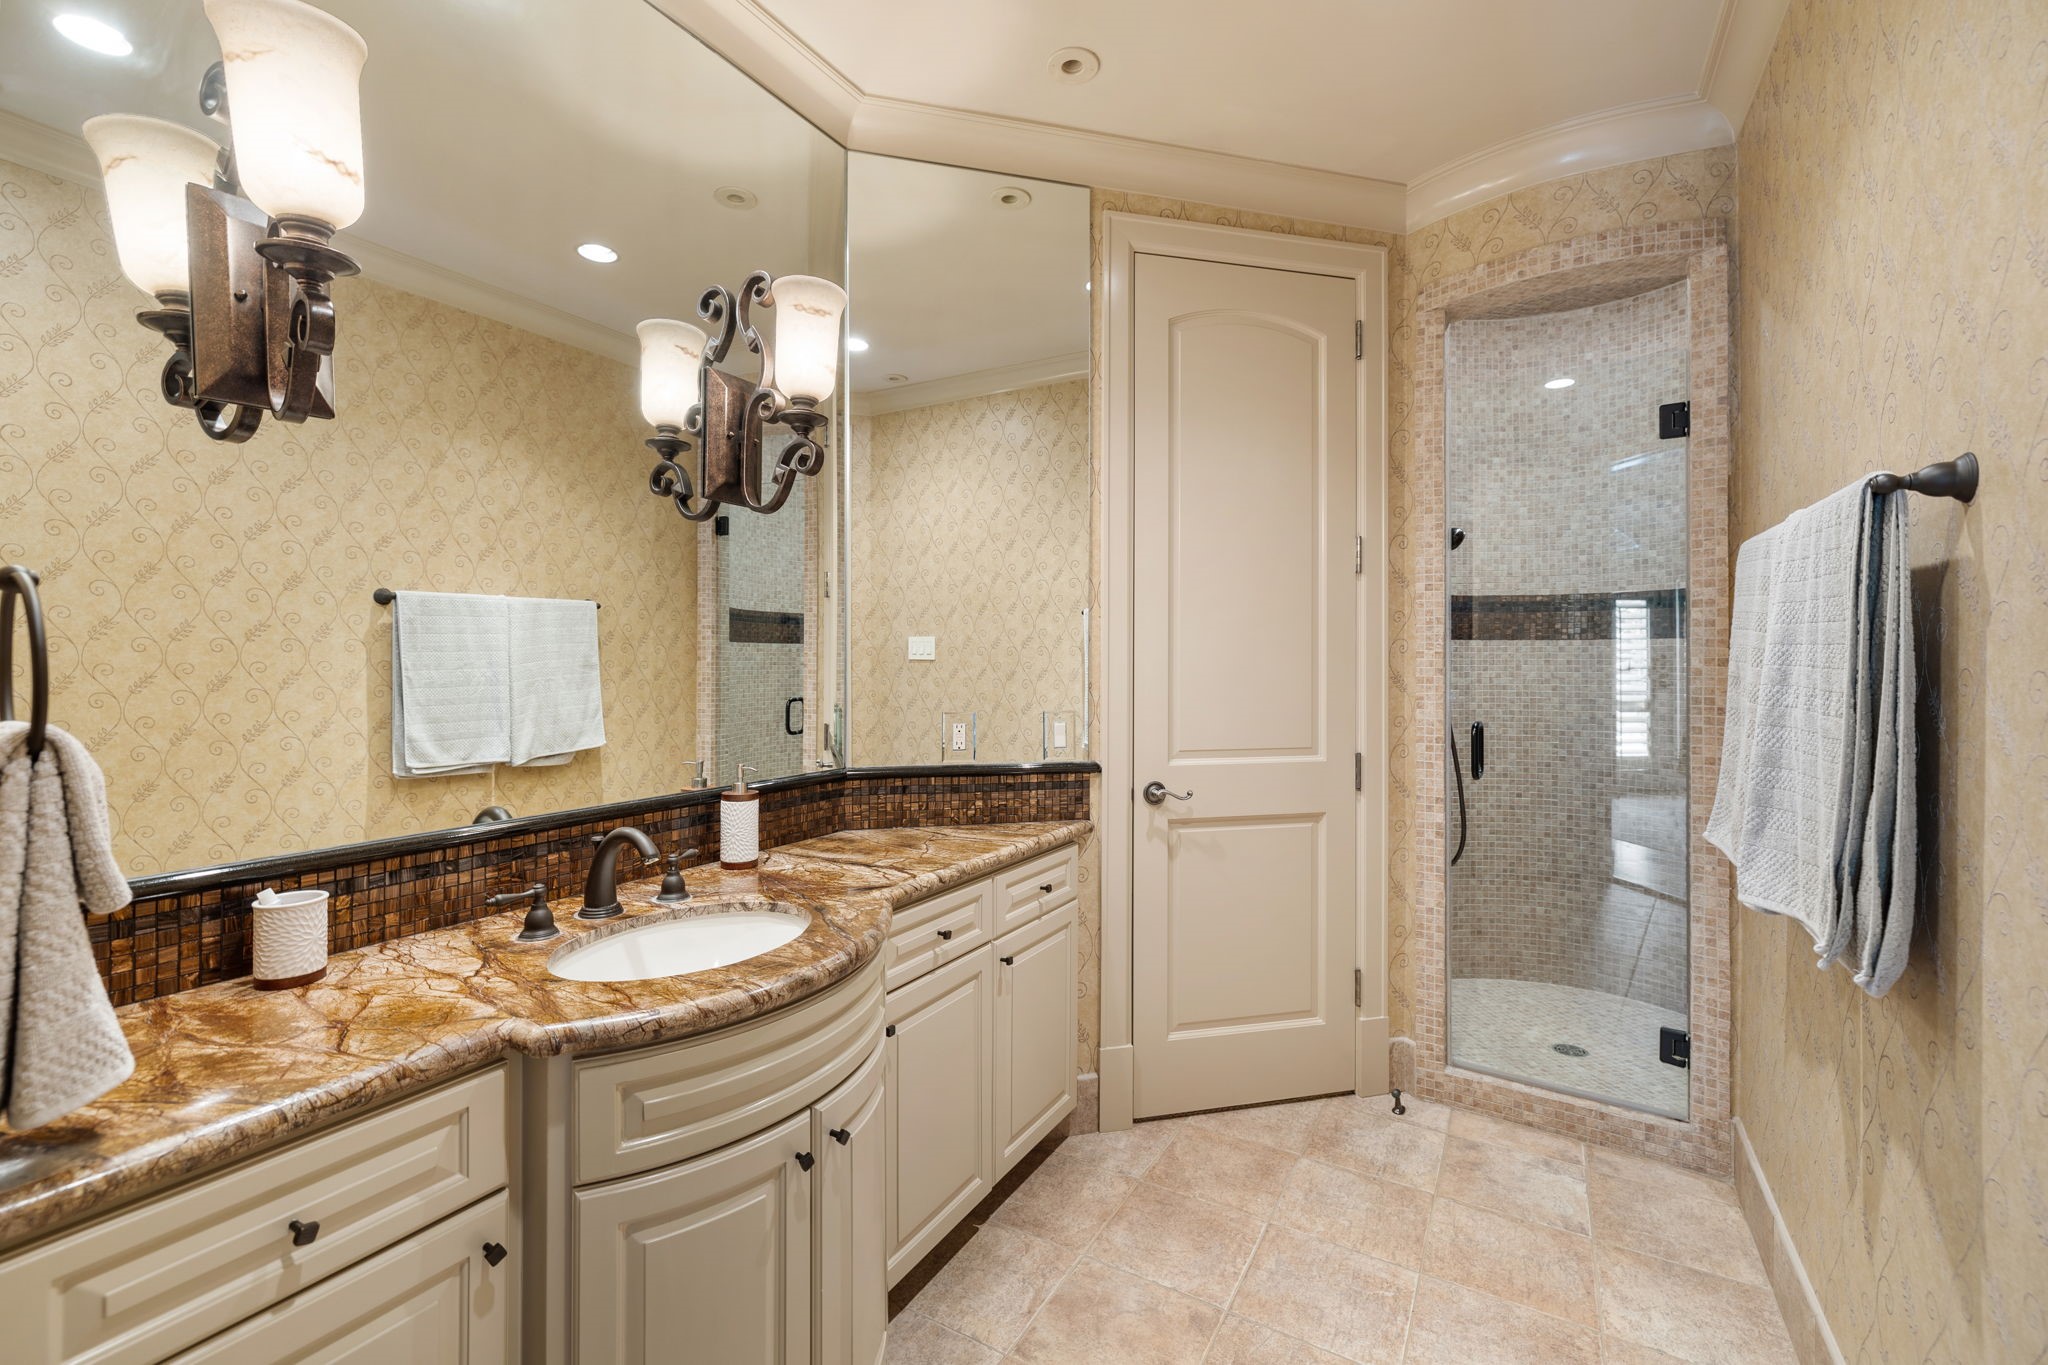 Every Bathroom in the home features custom cabinetry, captivating stone selections and tile selections for a unique look in each.